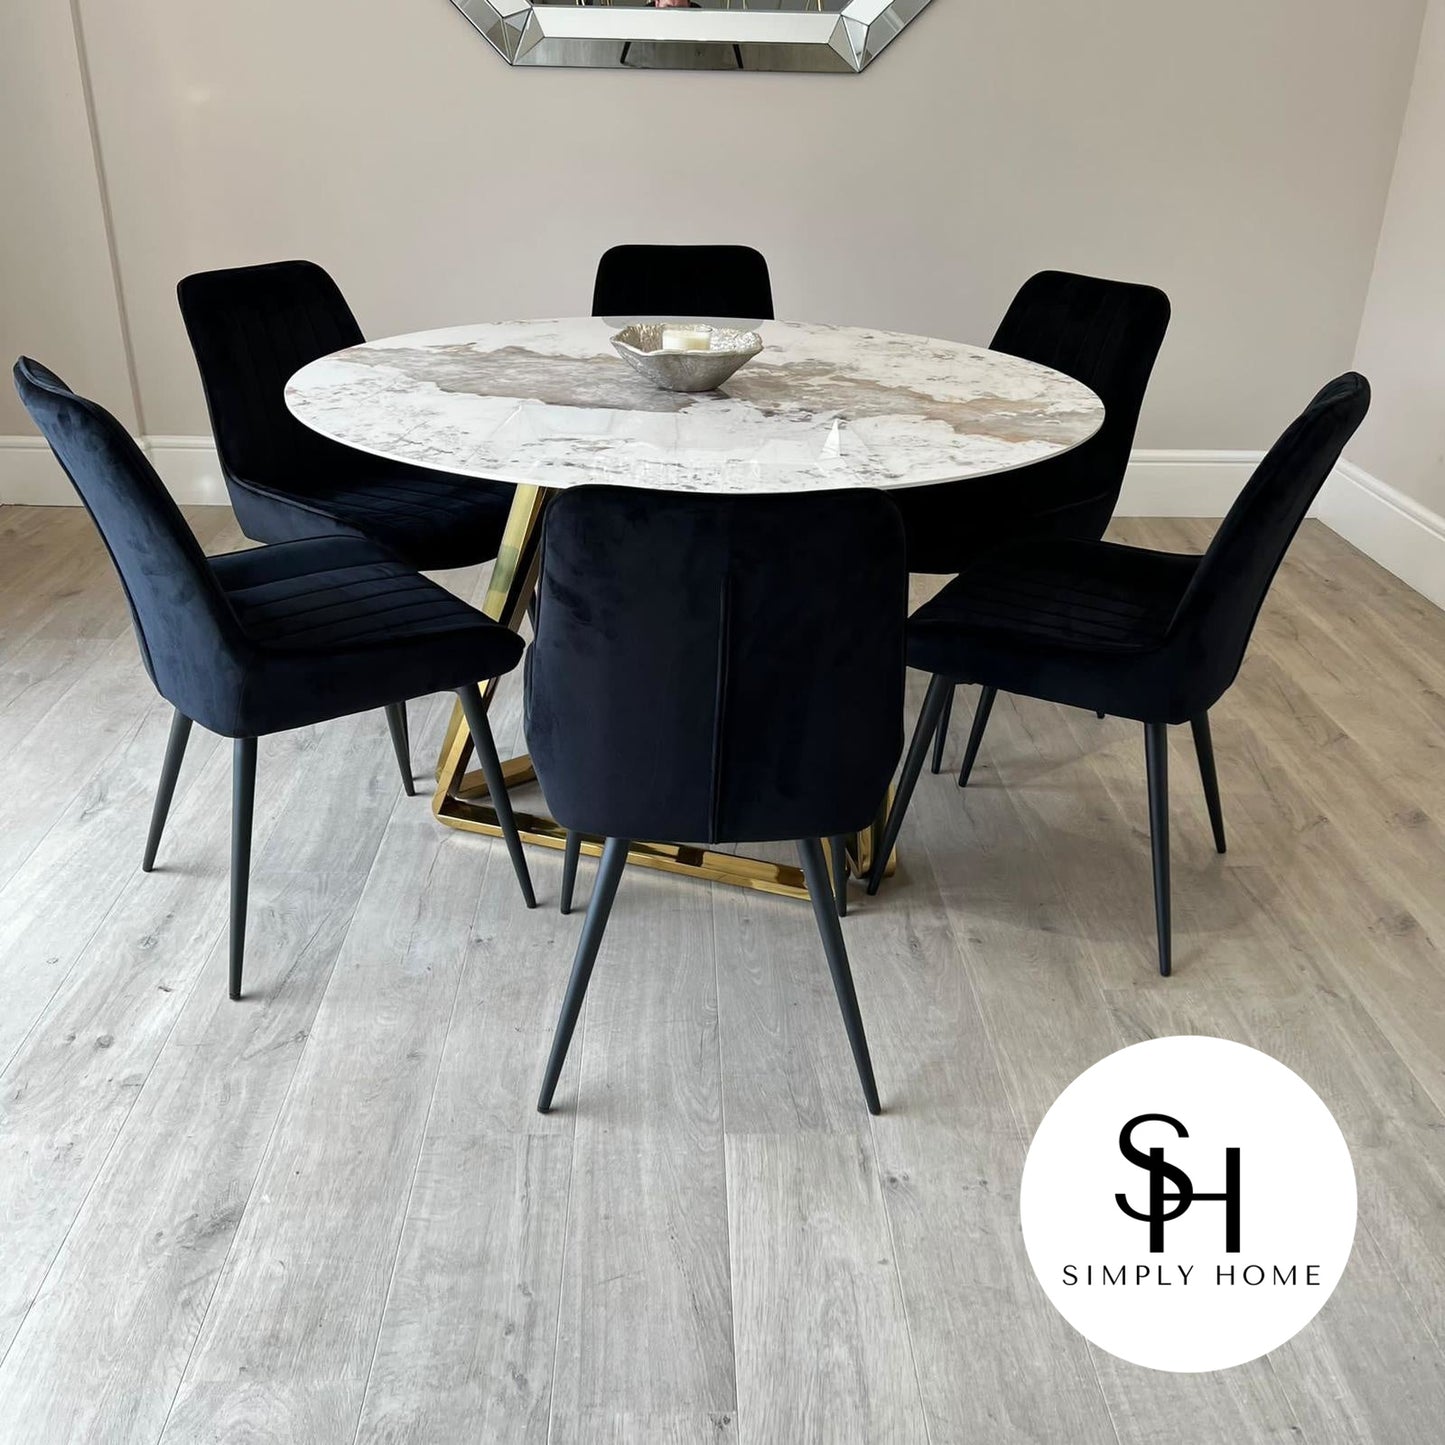 Capello Gold Circular White and Grey Marble Dining Table with Black Luca Chairs